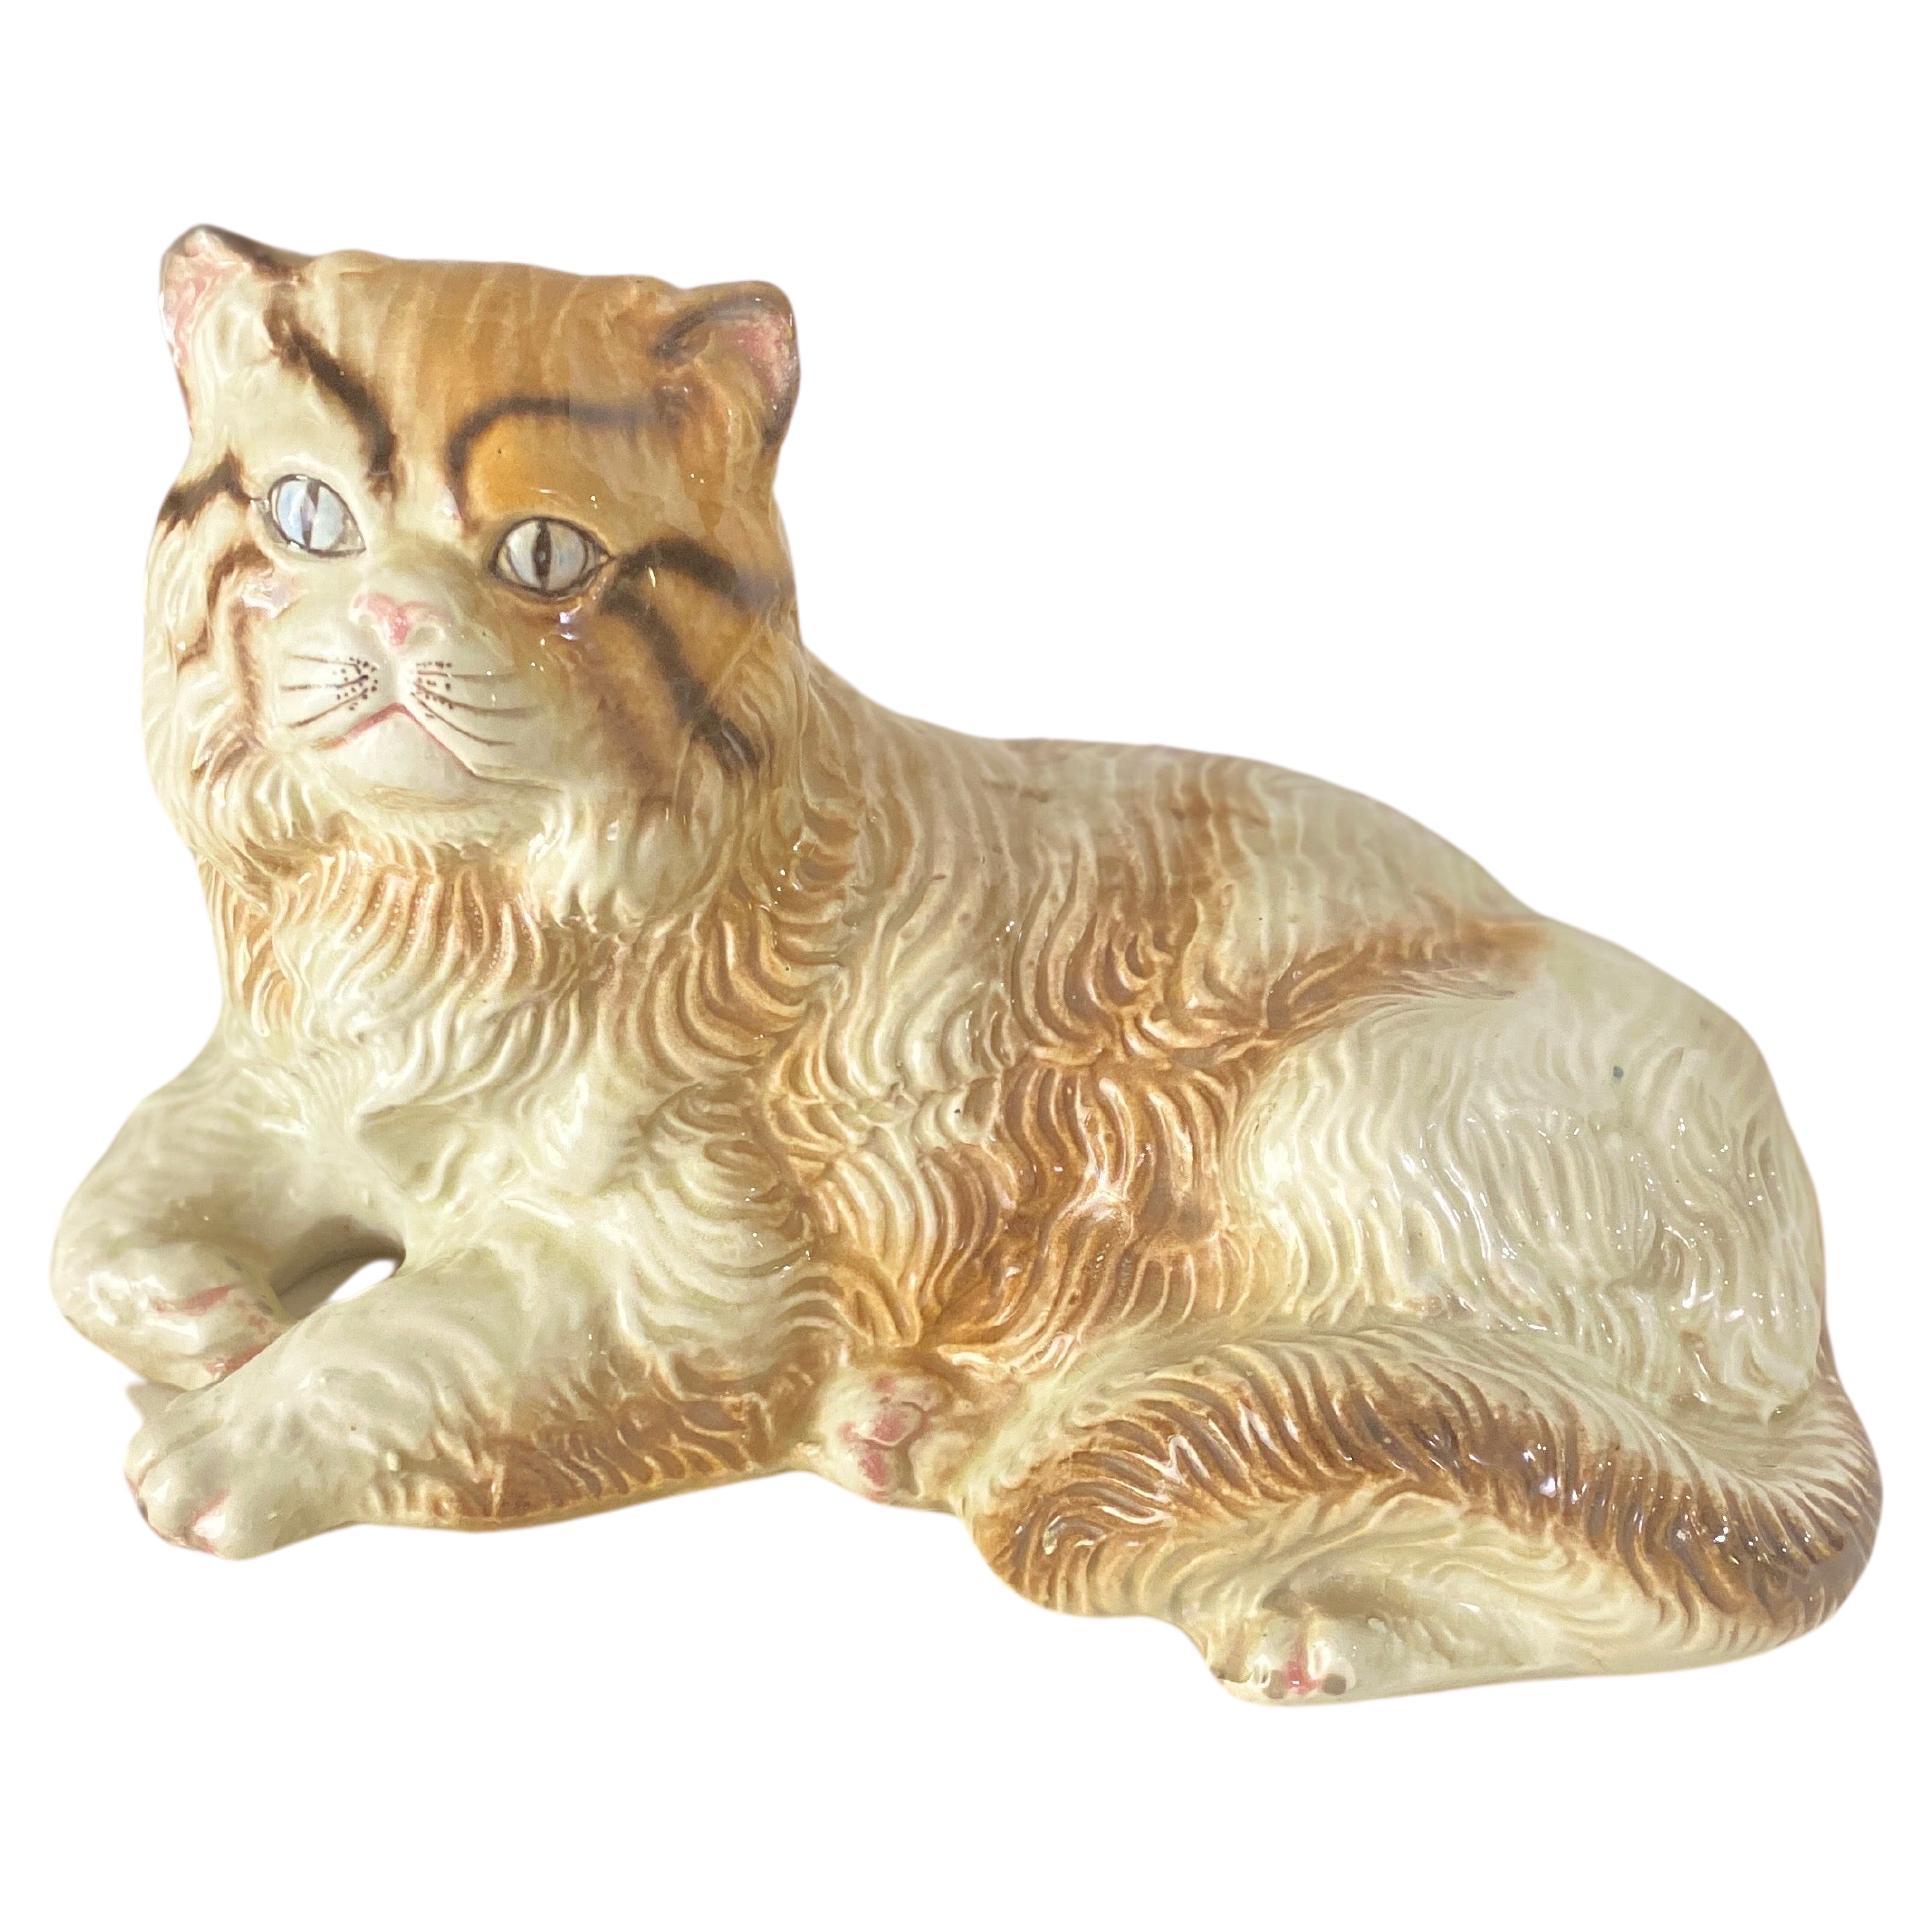 Sculpture of Large Cat Italian Ceramic  from the 1970s with Hand-Painted Details For Sale